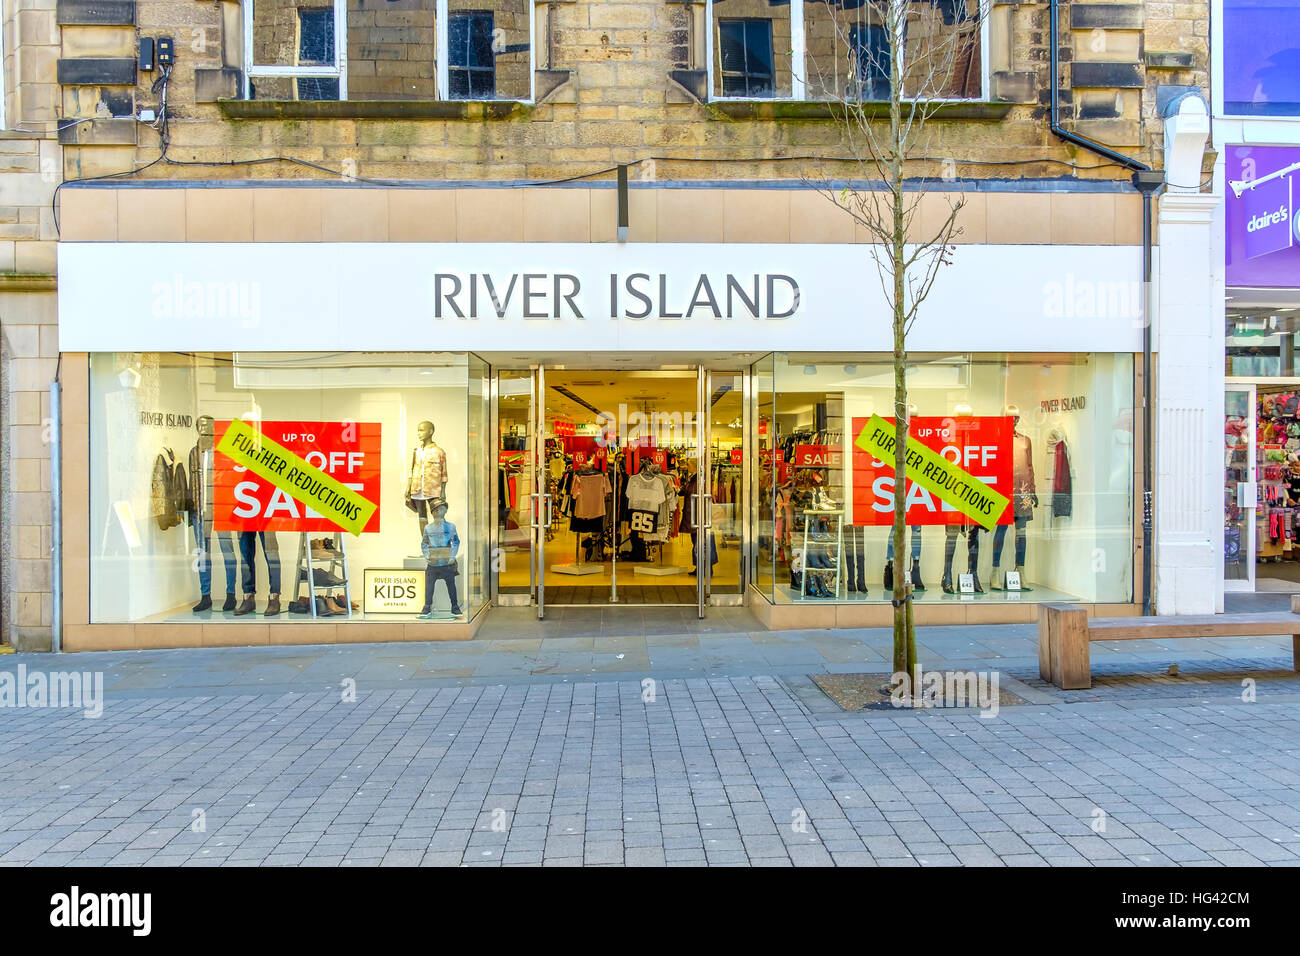 River Island Shop with Sale Posters in window Stock Photo